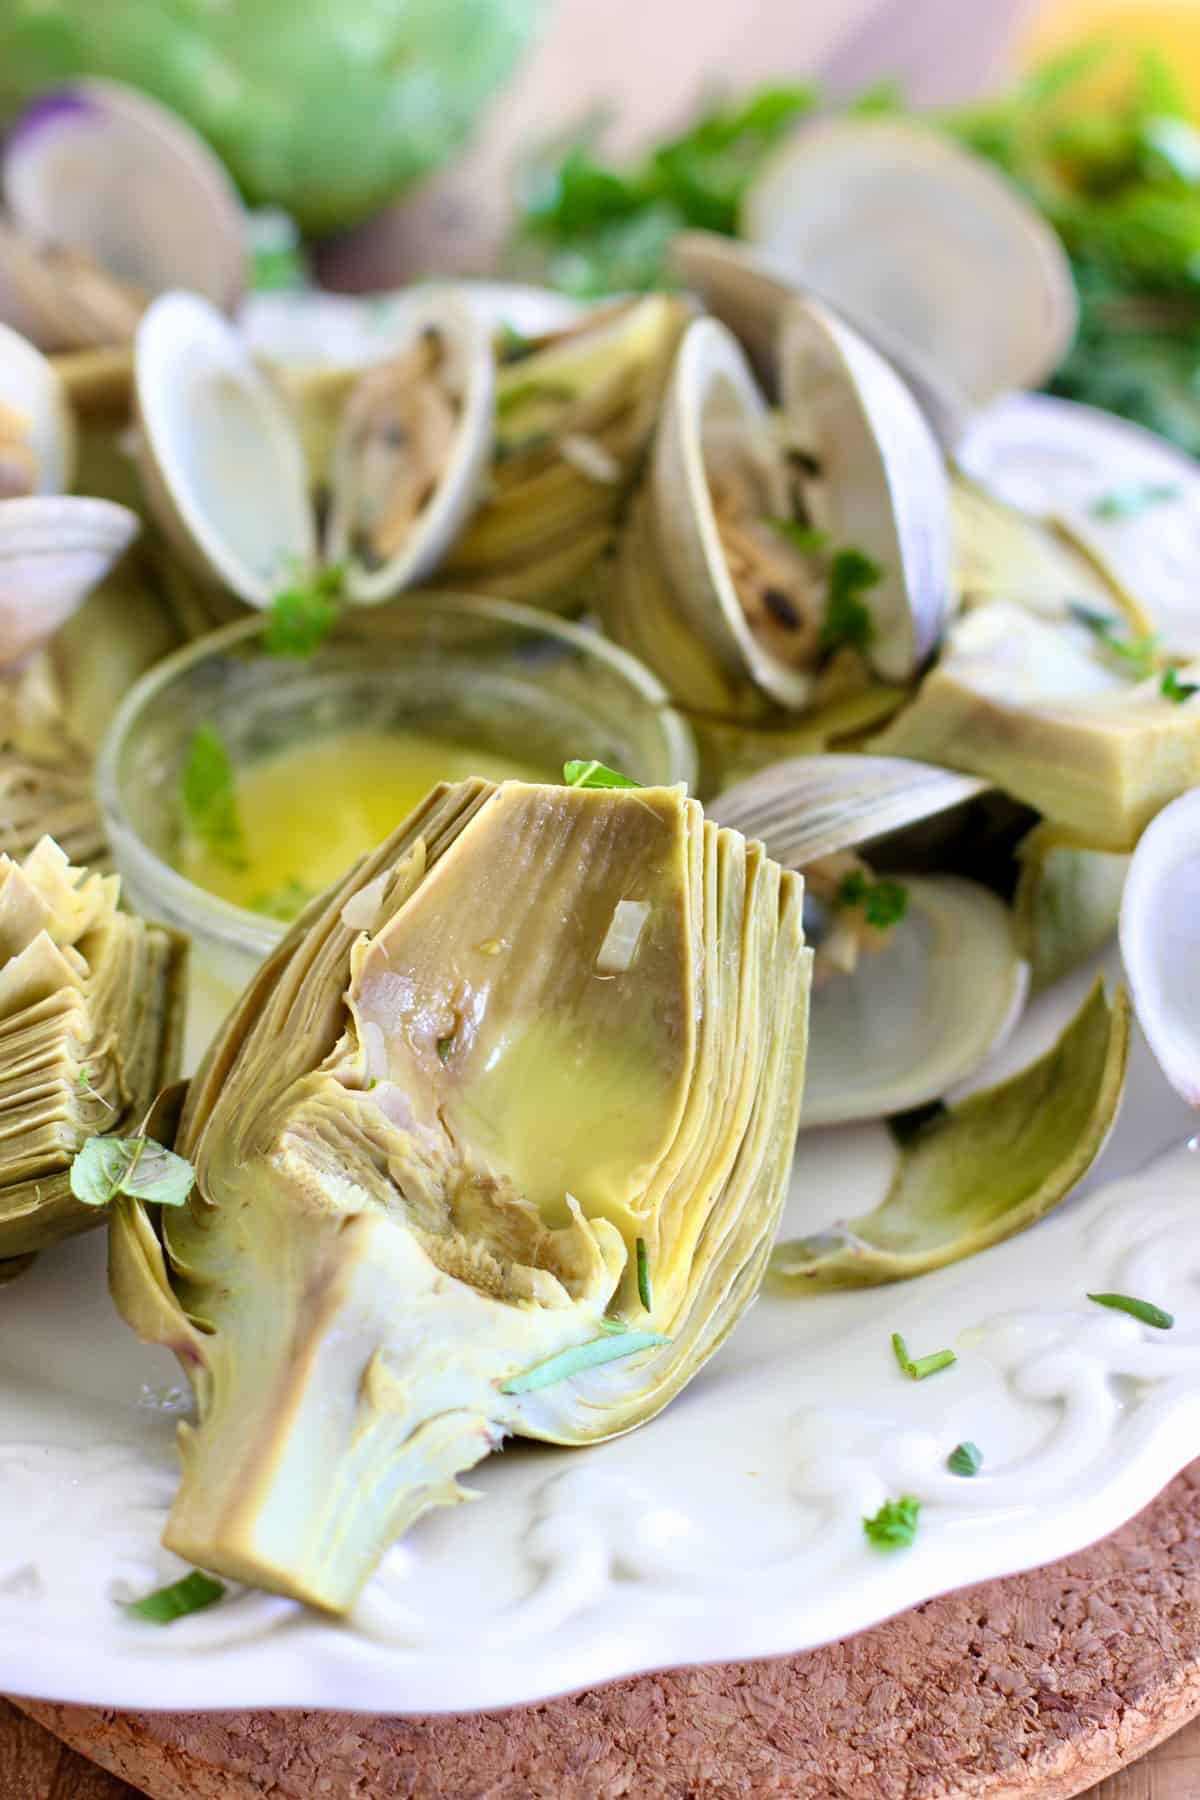 Steamed artichokes and clams